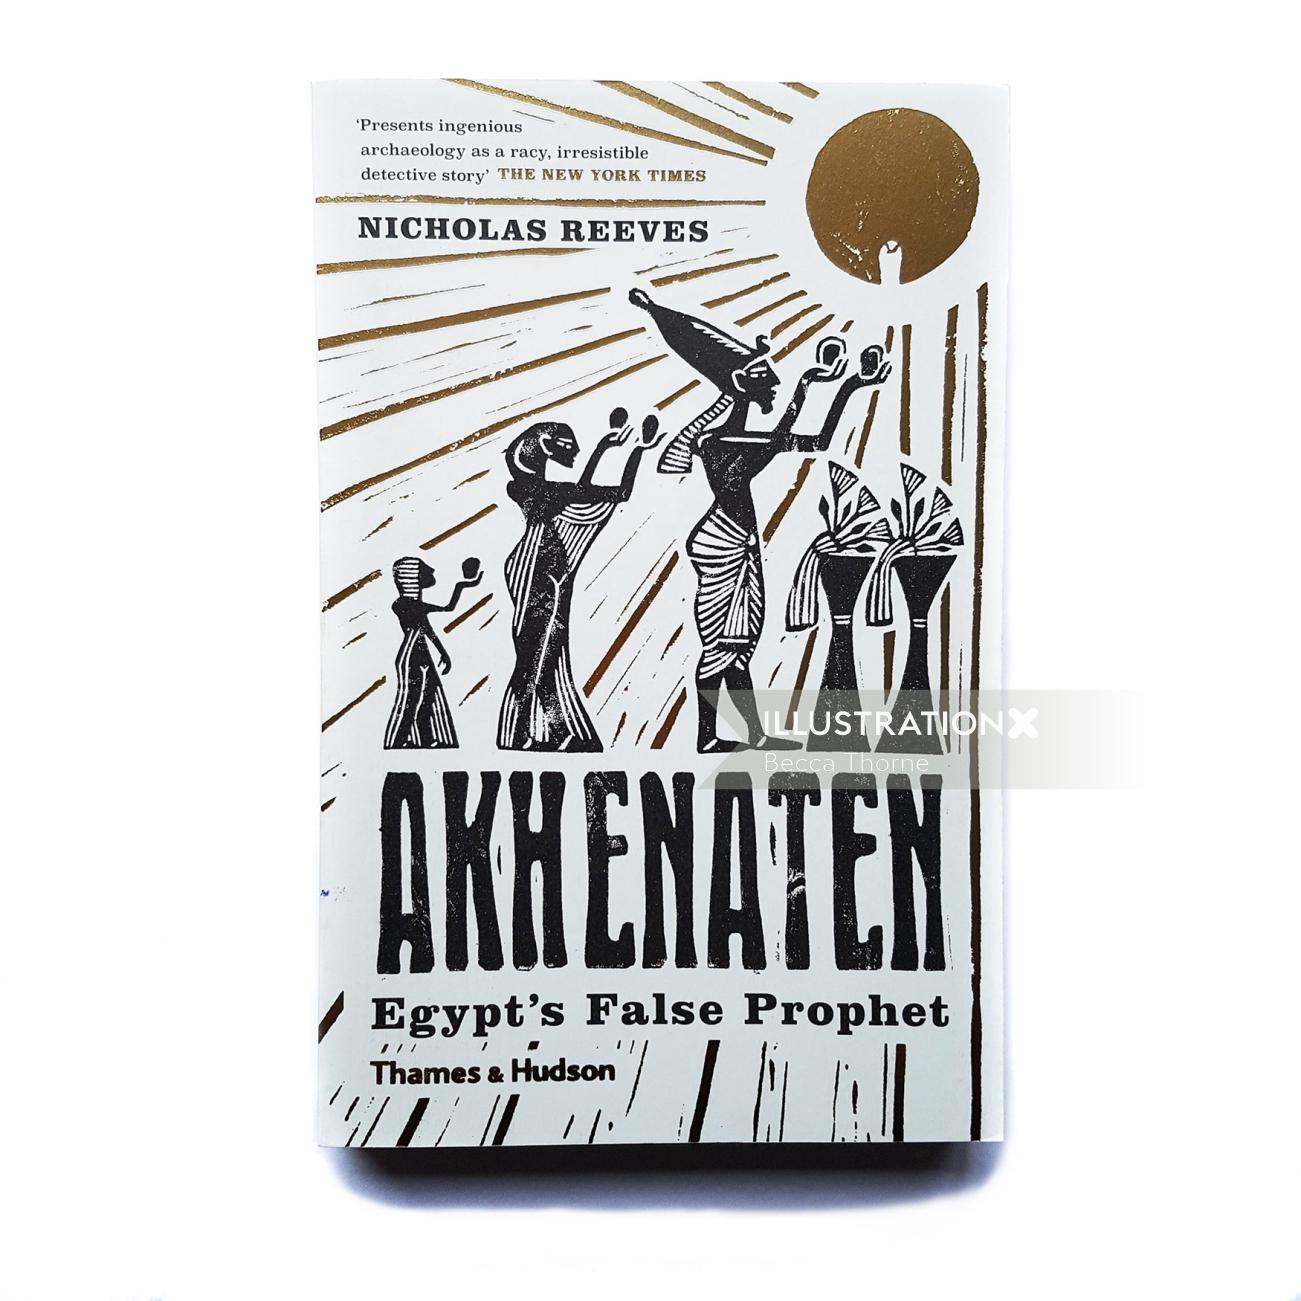 Book cover for Akhenaten: Egypt's False Prophet by Nicholas Reeves. The cover is white with a black 